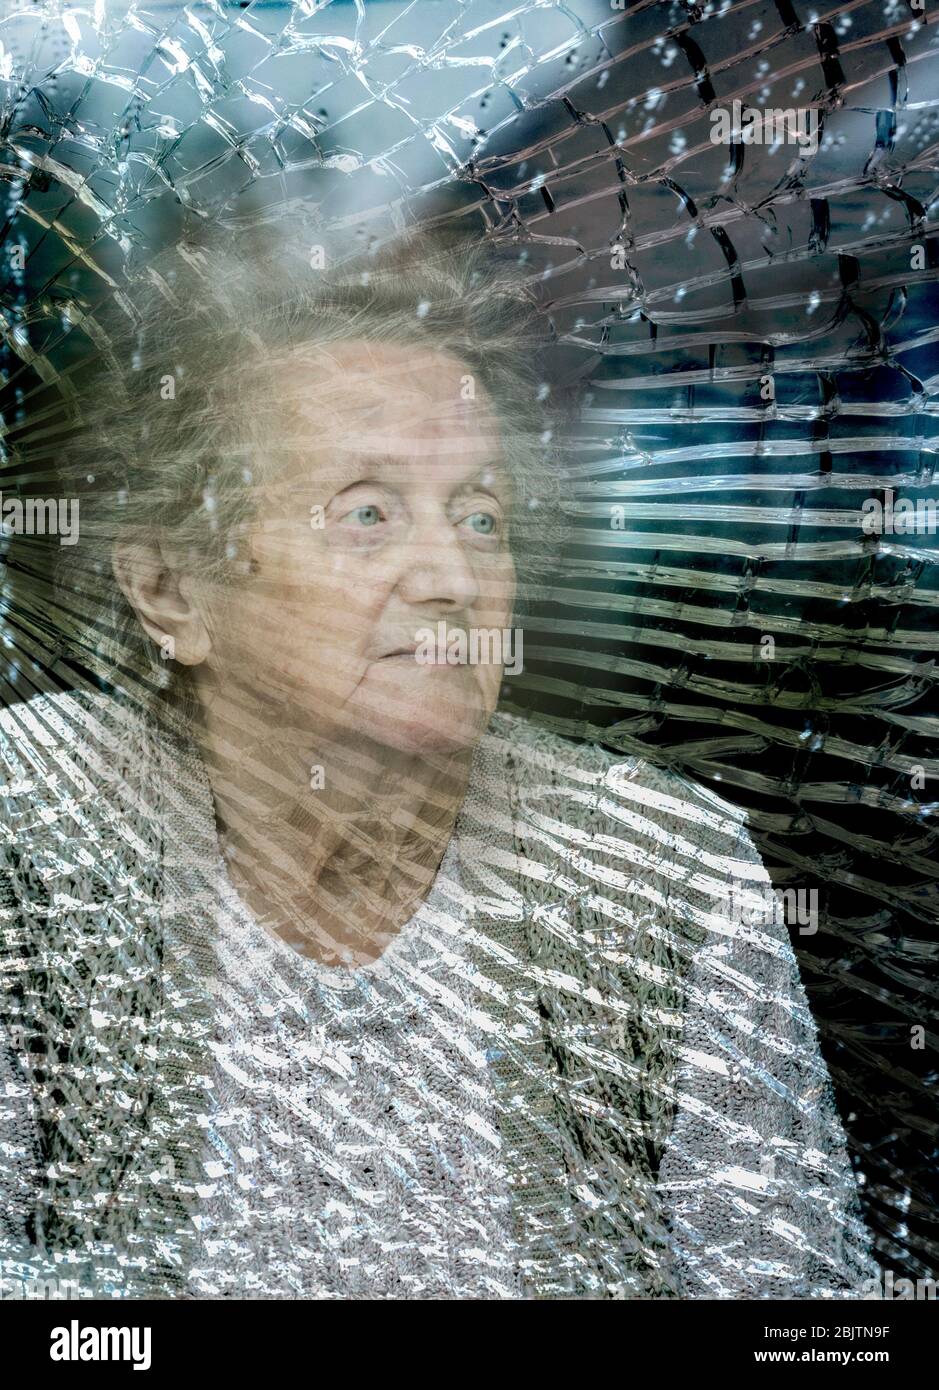 Ninety year old woman looking out of cracked window on a rainy day. Self isolation, loneliness, coronaviurus, social distancing concept... Stock Photo